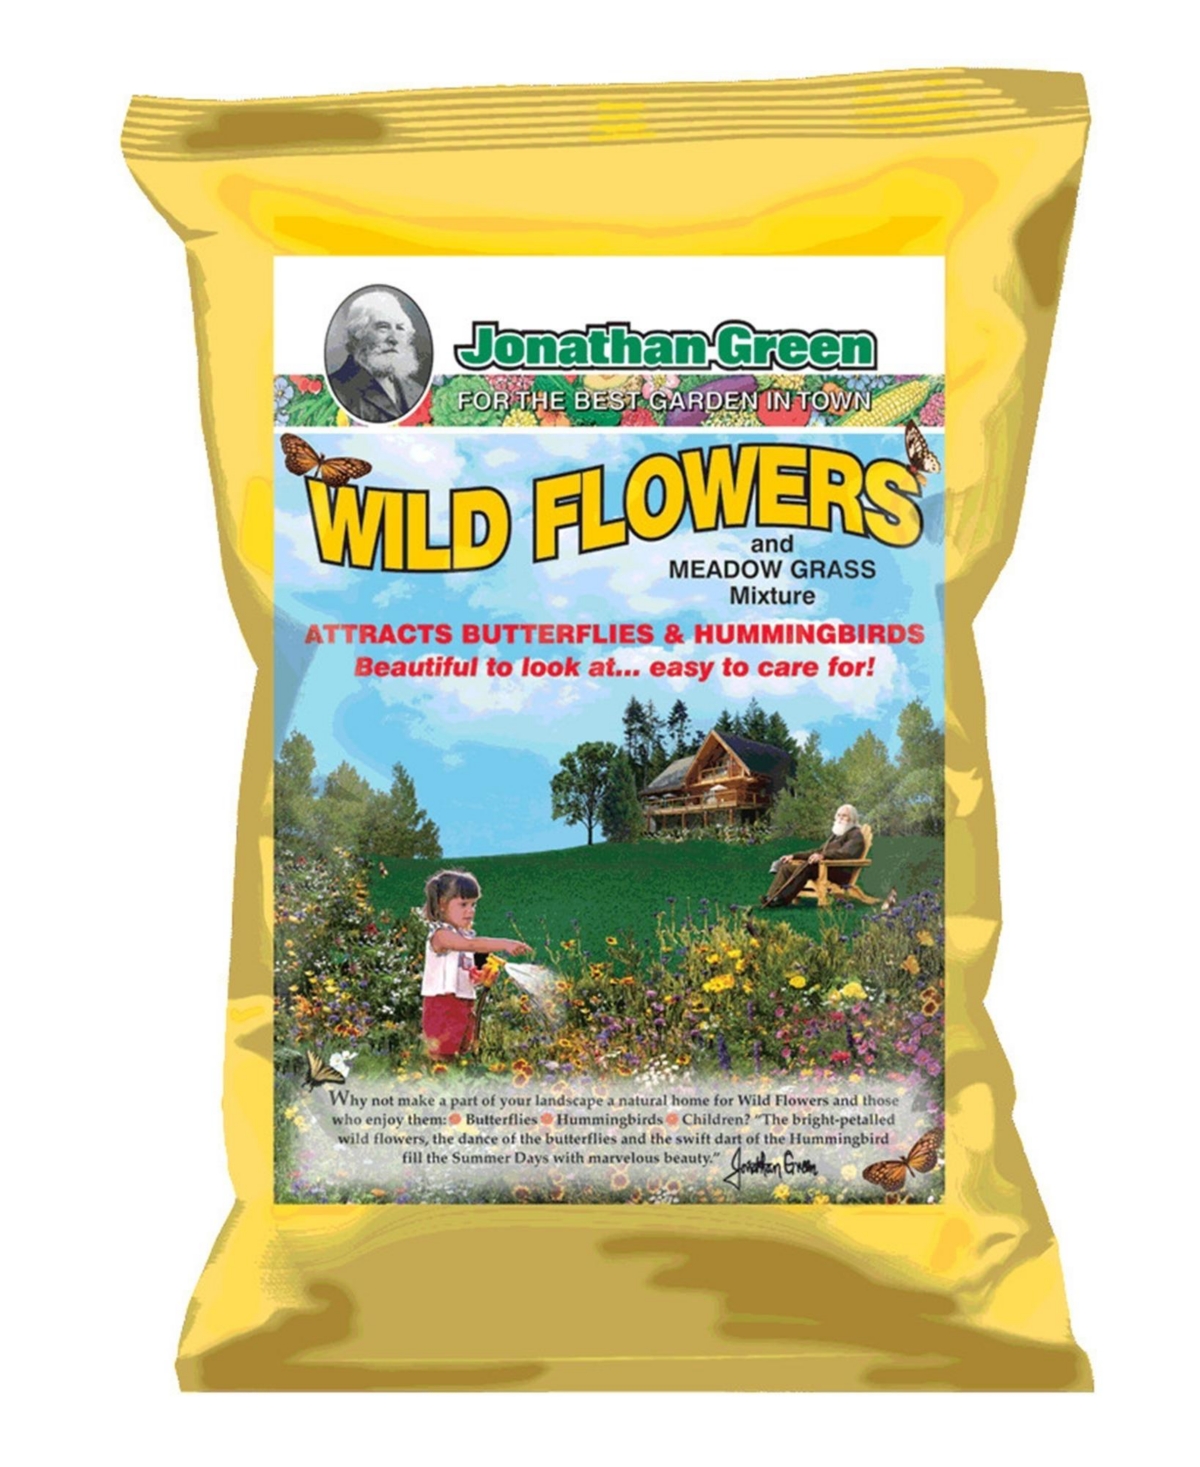 (#12384) Wildflower and Meadow Mix Seed- 1lb bag - Multi